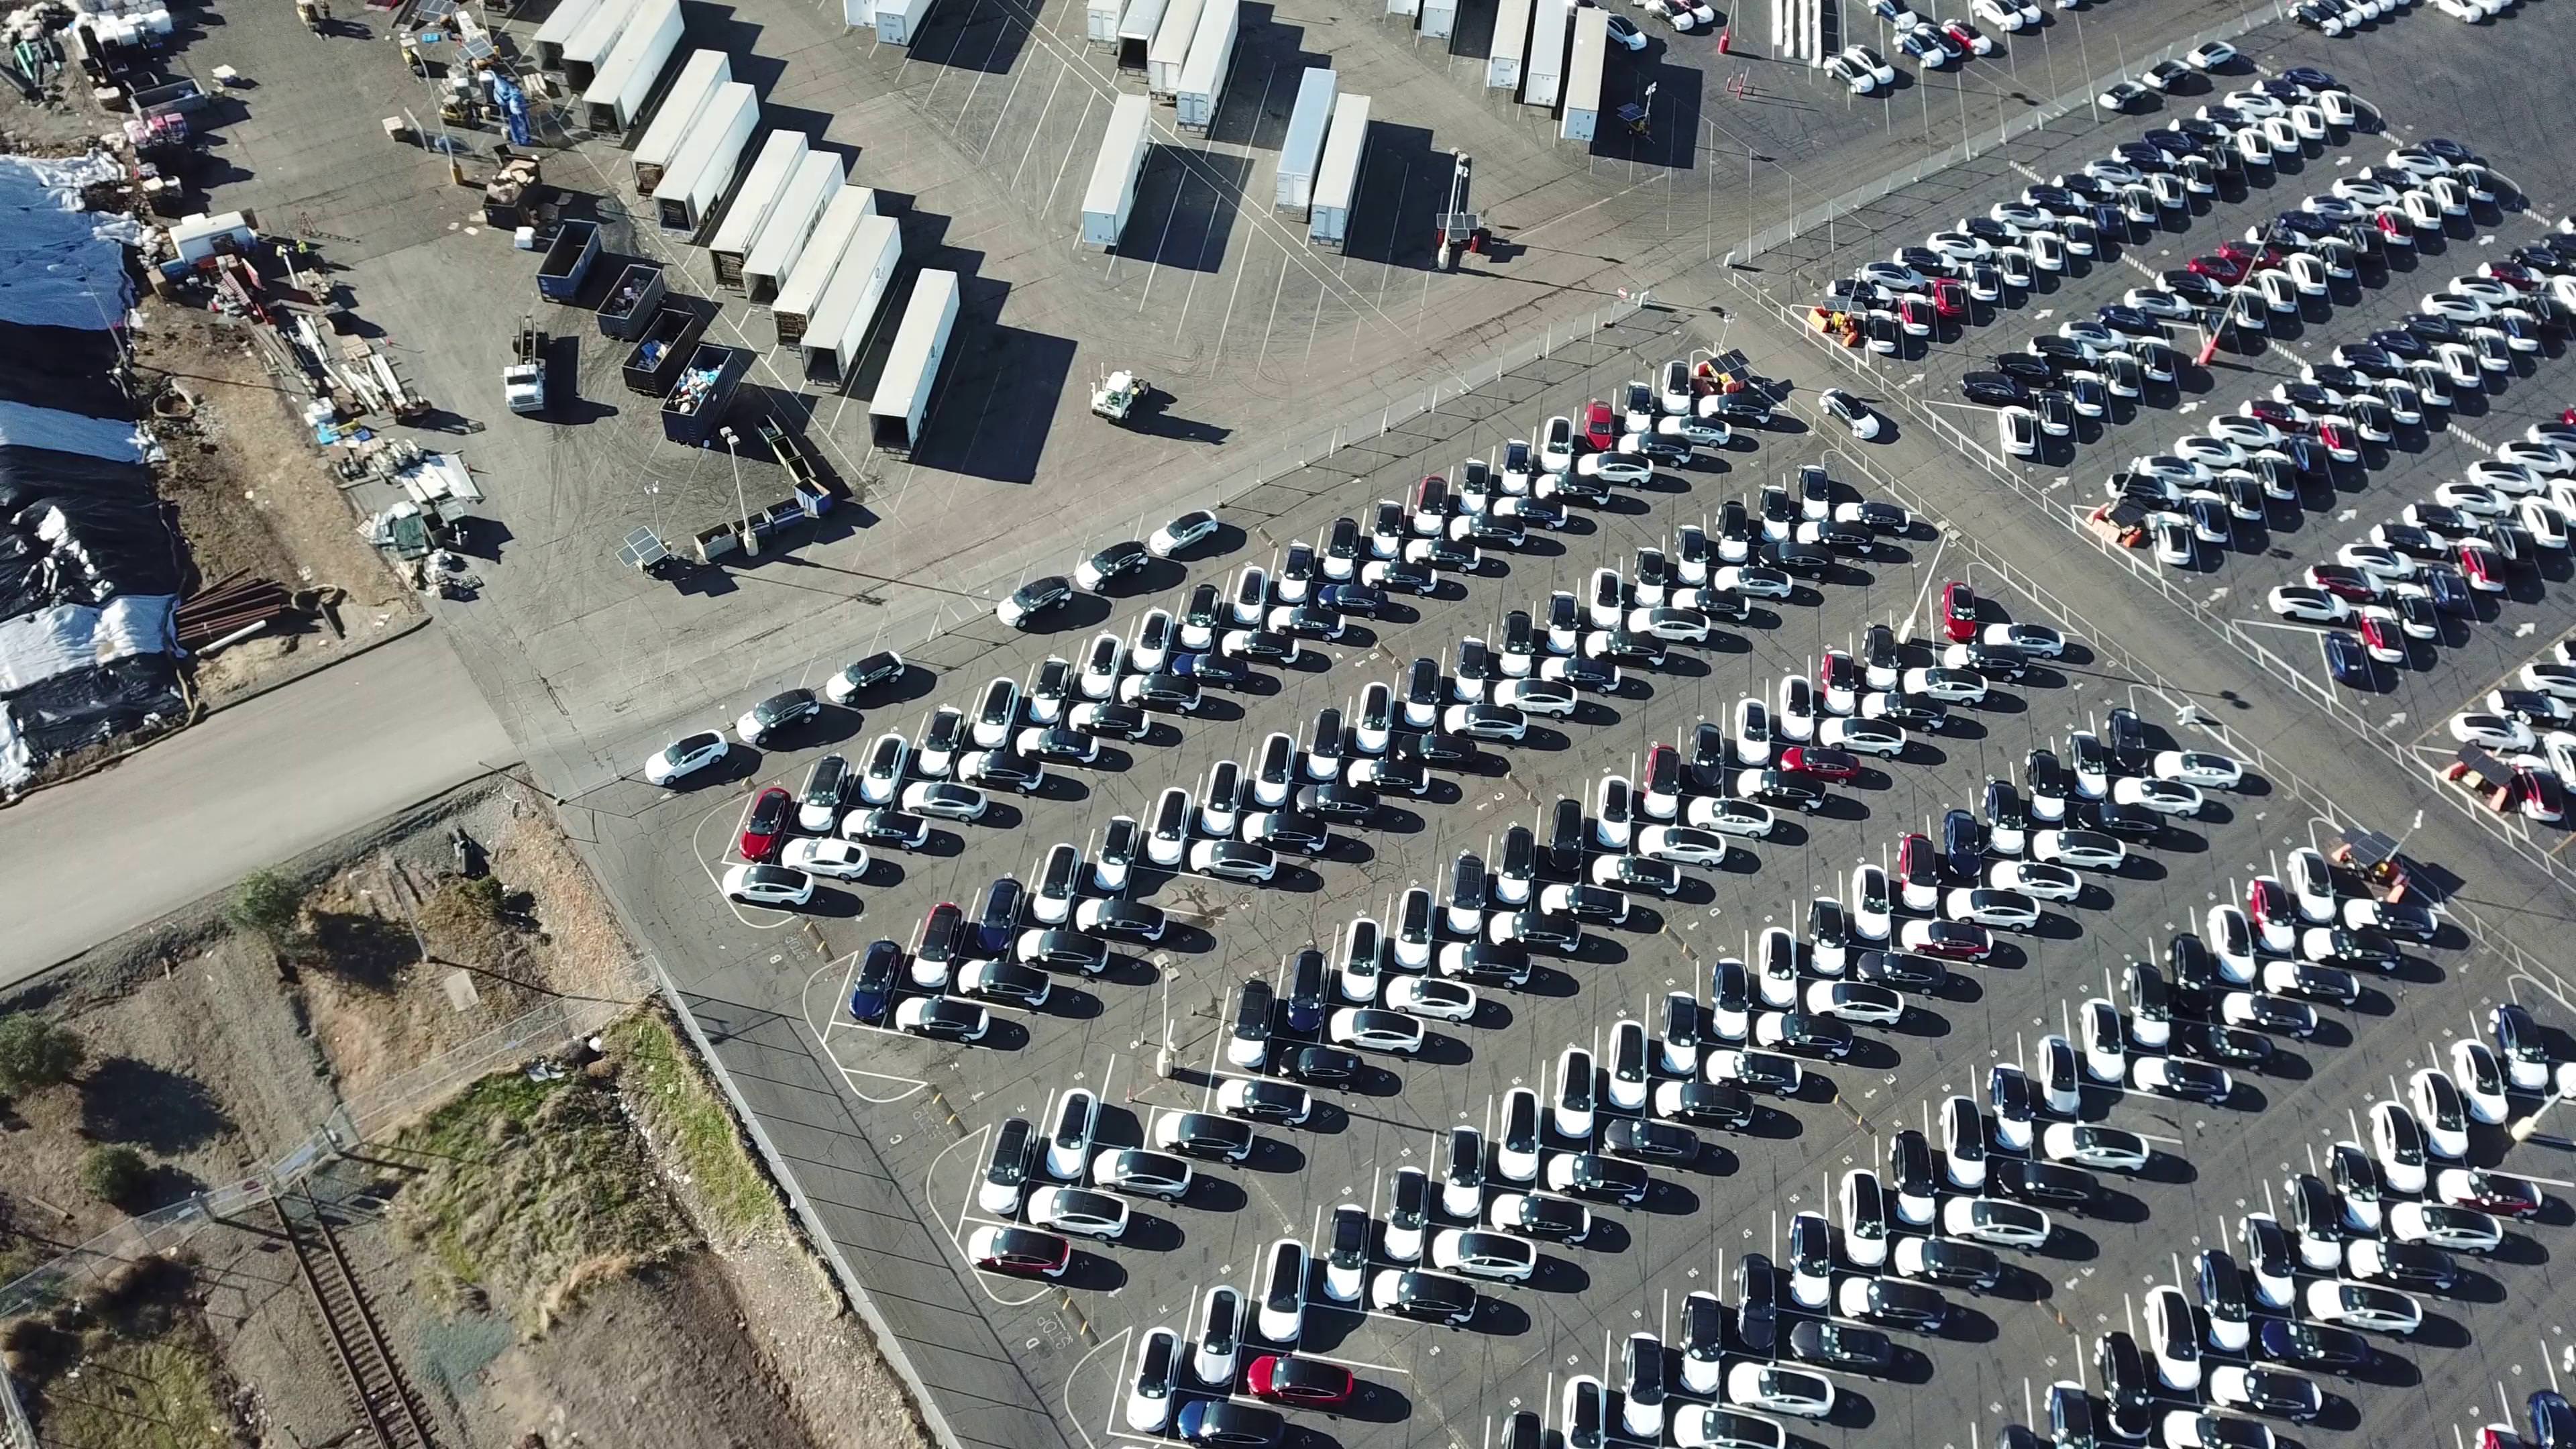 tesla-model-3-inventory-fremont-factory-drone-aerial